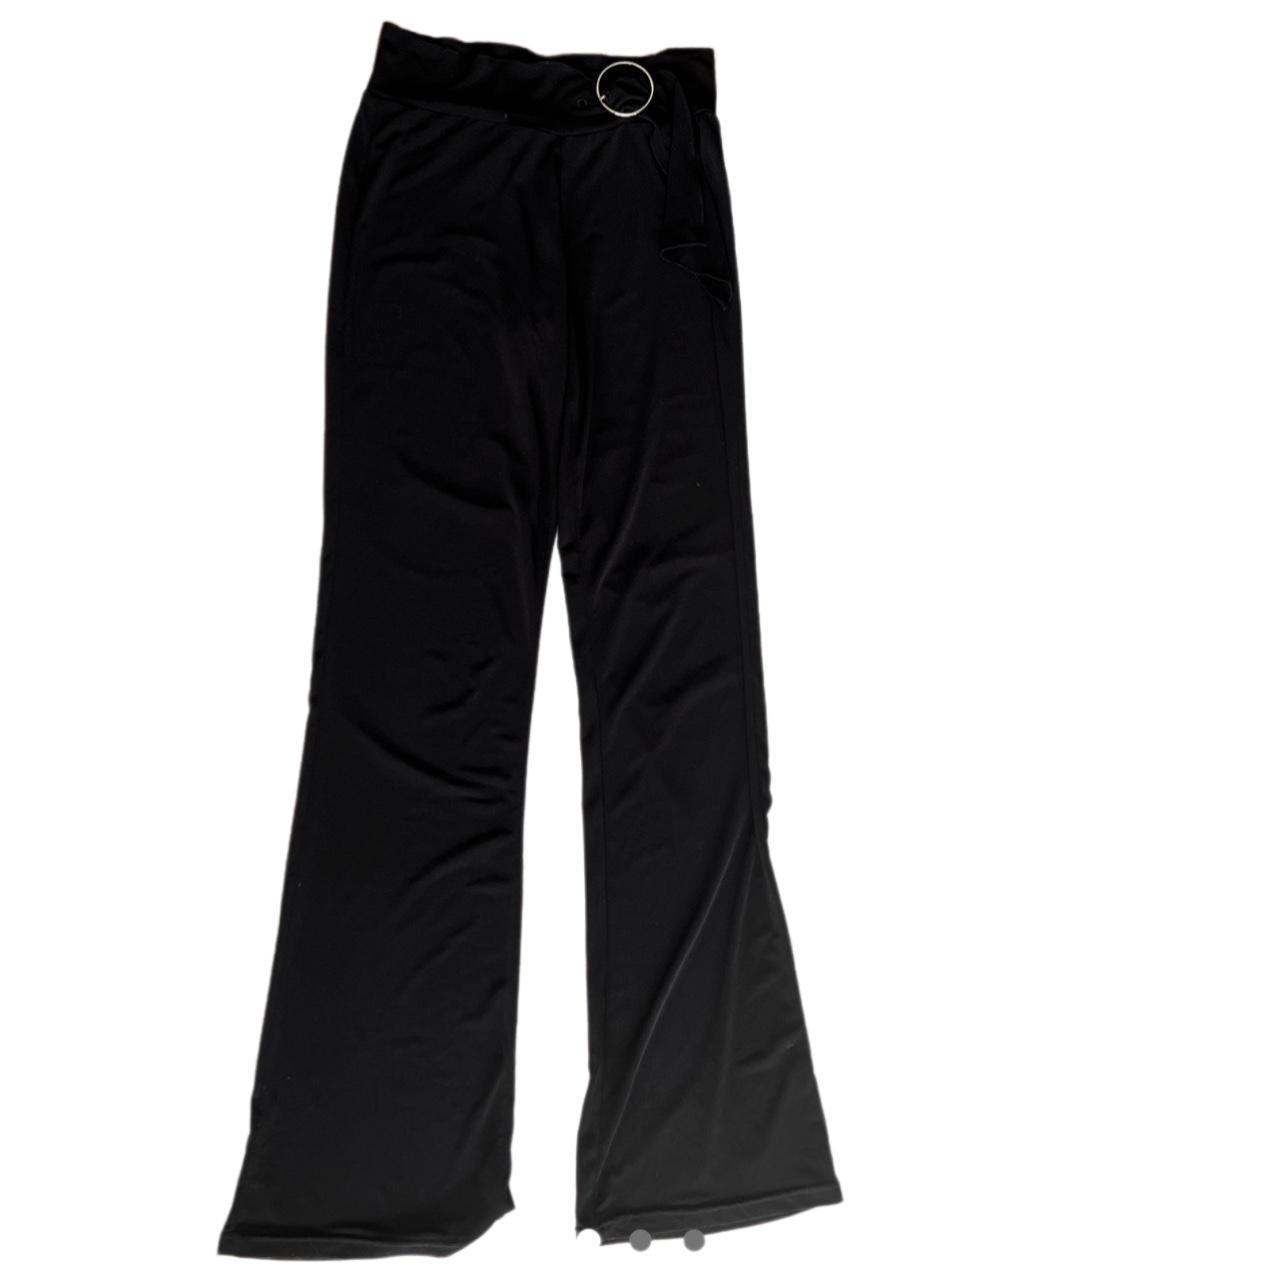 Product Image 1 - I.AM.GIA black flowy pants
Size: small
Price: